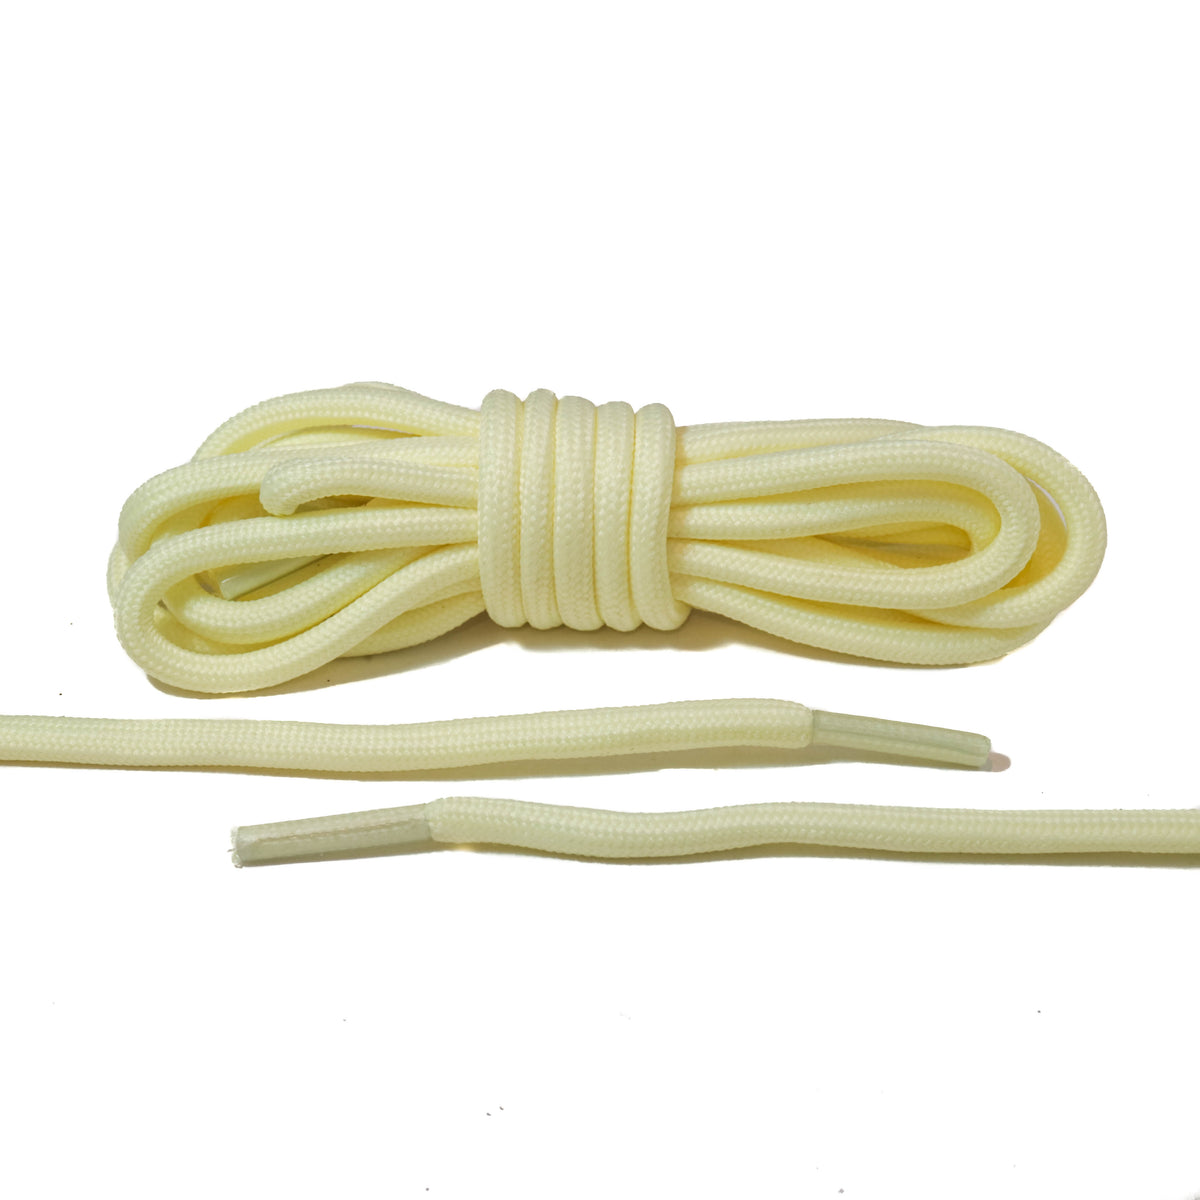 yeezy butter shoelaces